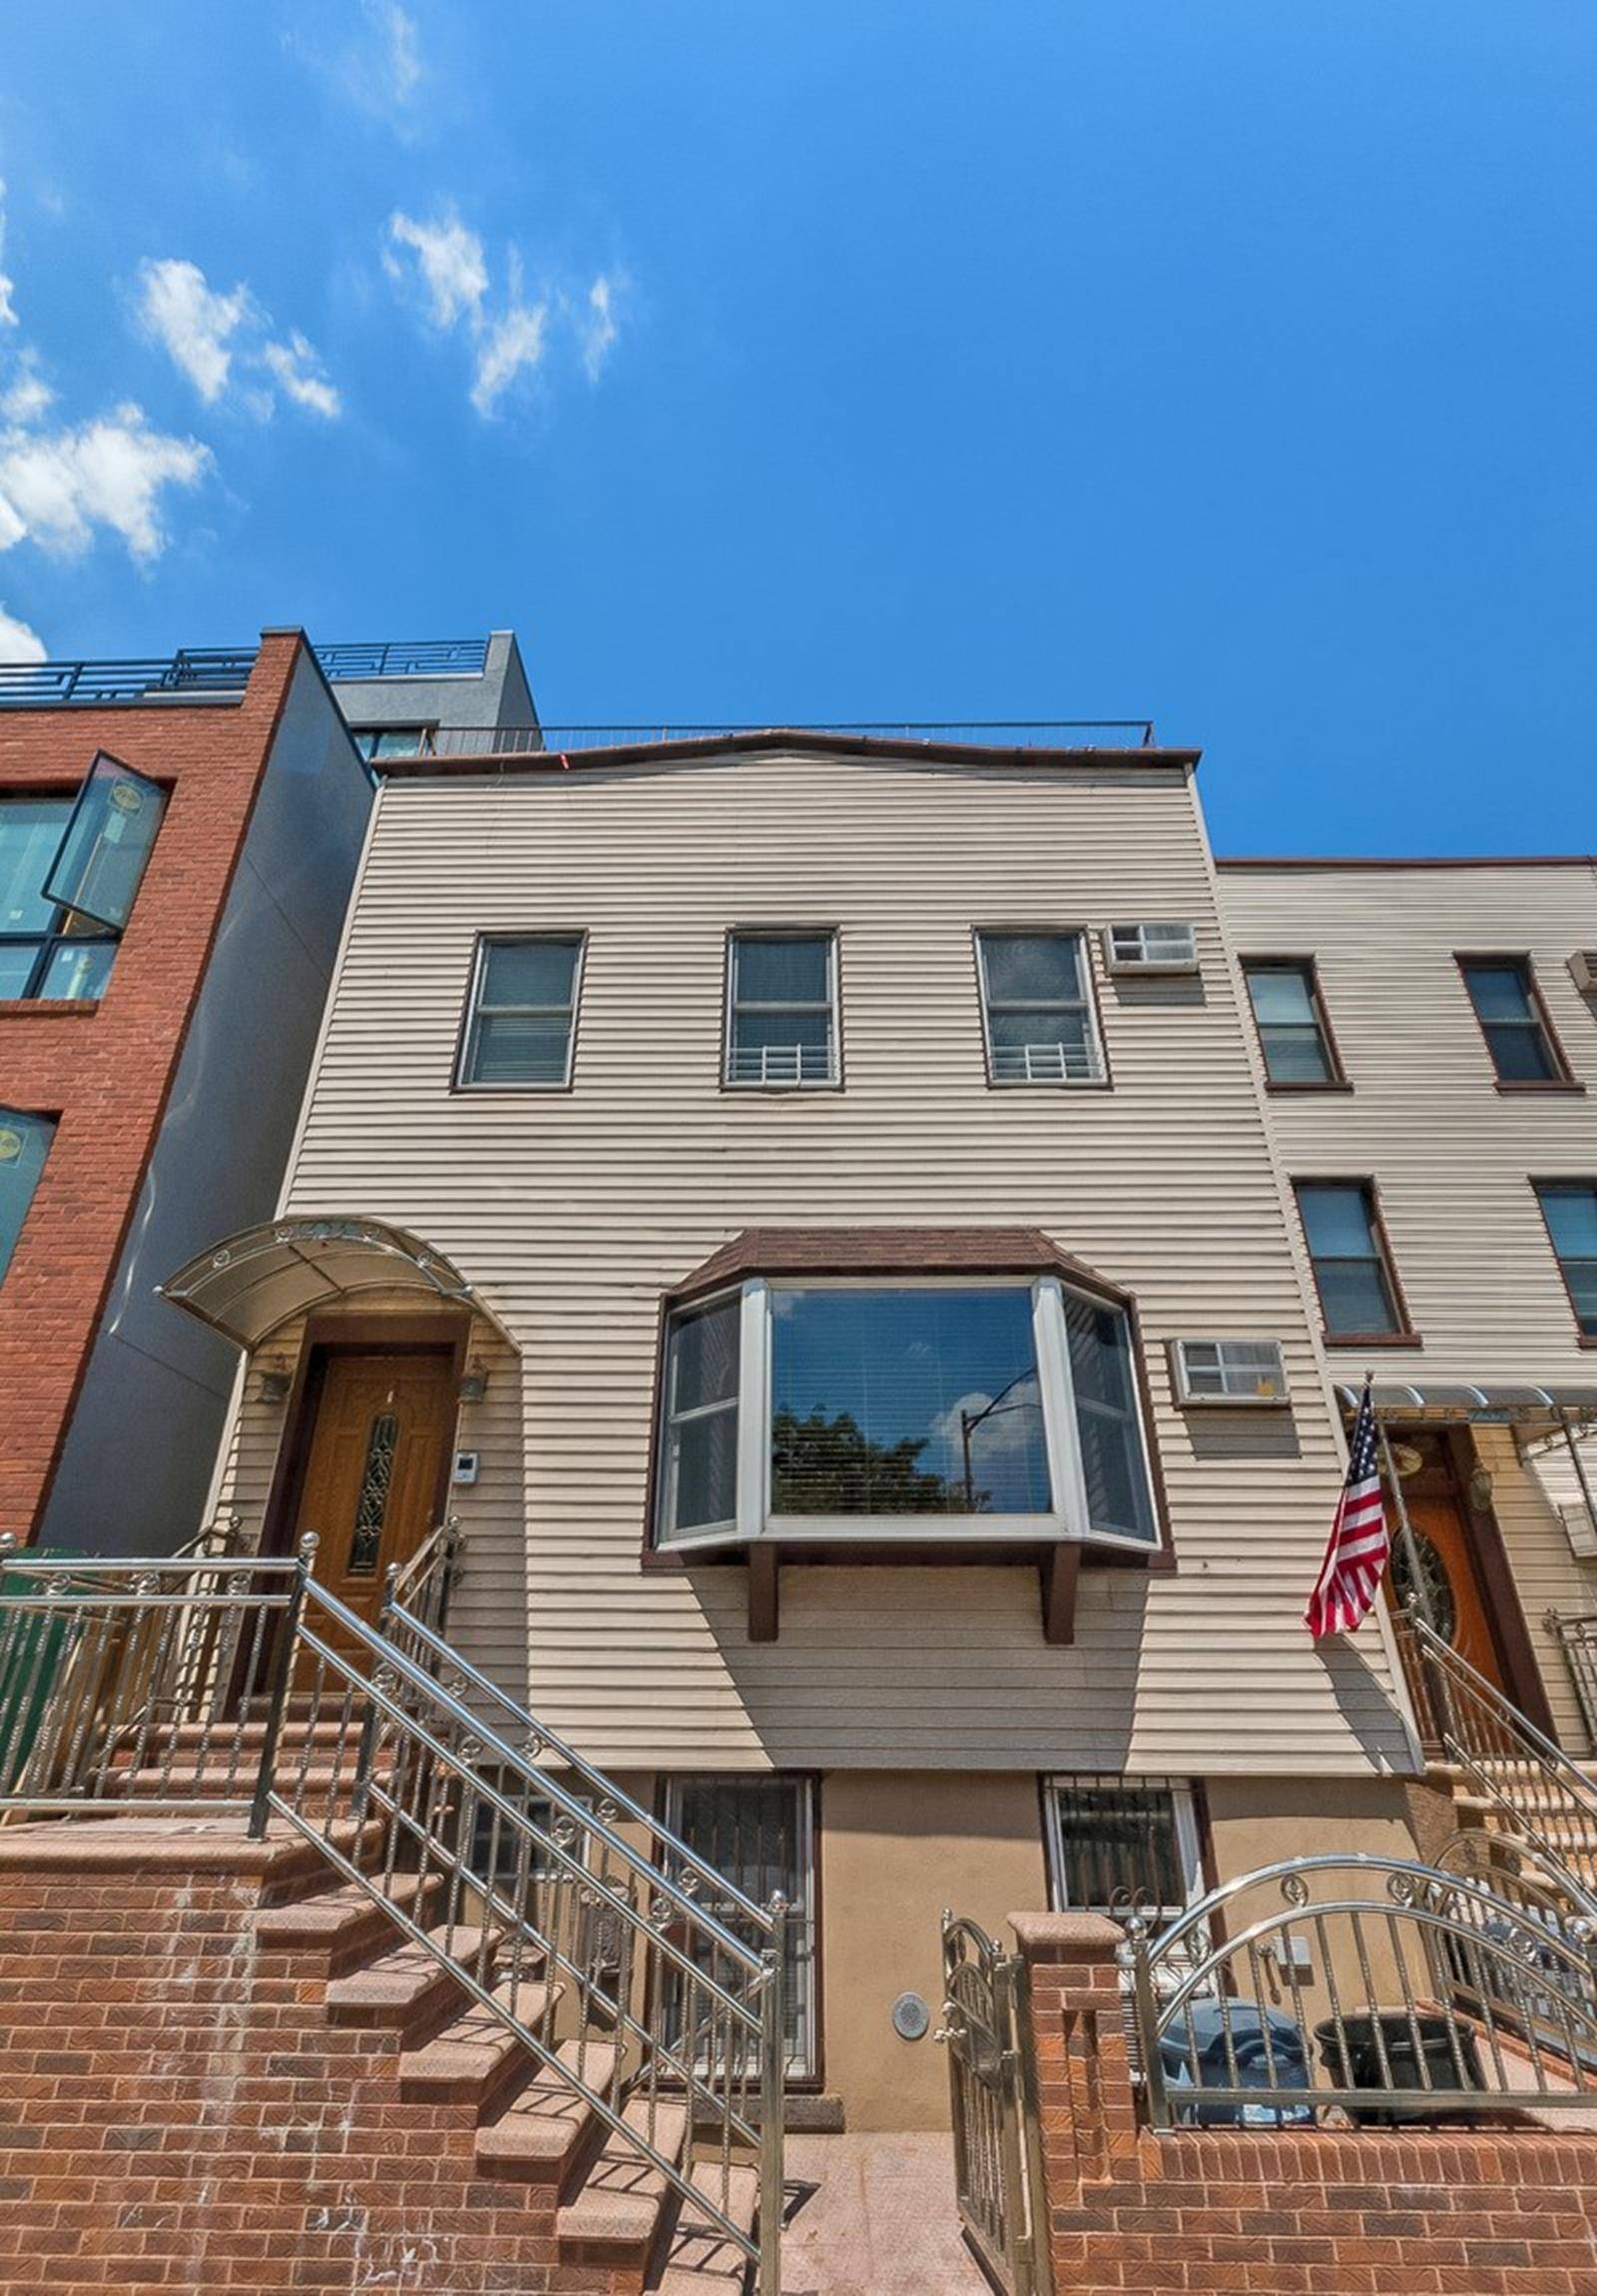 This beautiful fully detached two family home has just hit the Williamsburg market !